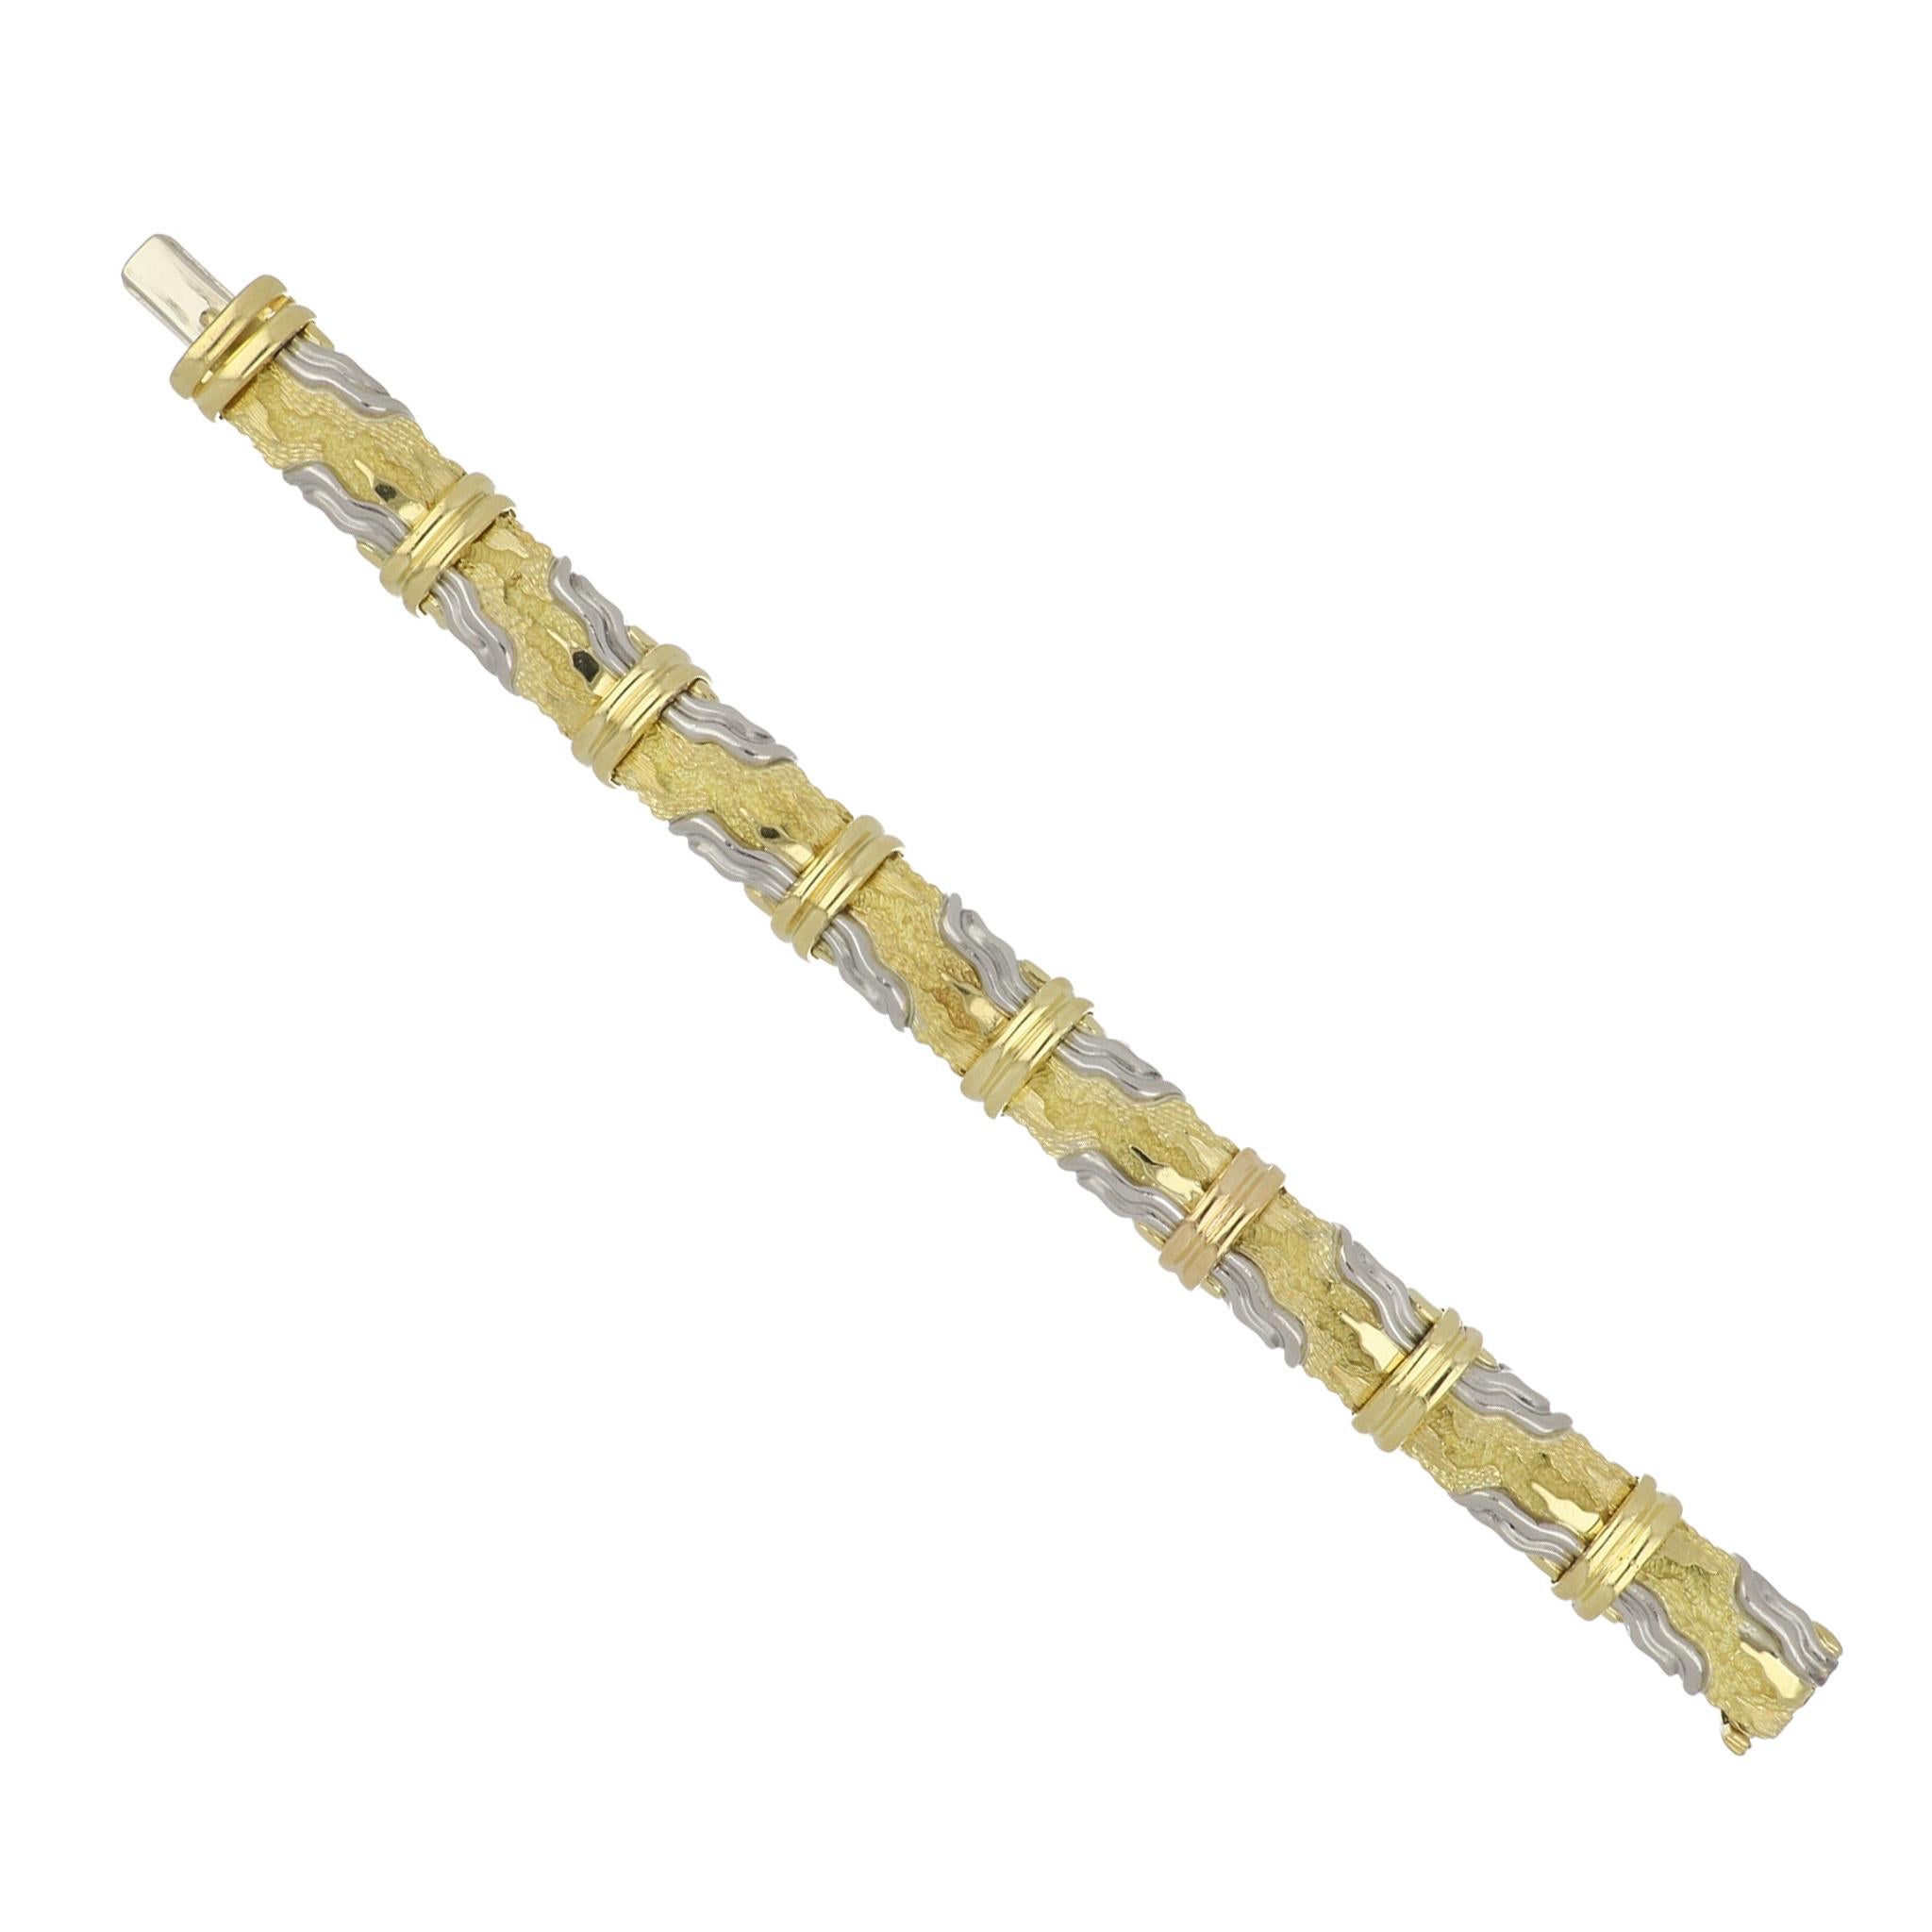 An estate Henry Dunay platinum and 18K yellow gold bracelet from the Cinnabar collection.  It has eight plaque like links with a textured design.  It measures 7 inches in length and 1/2 inch wide.  Circa 2000.
